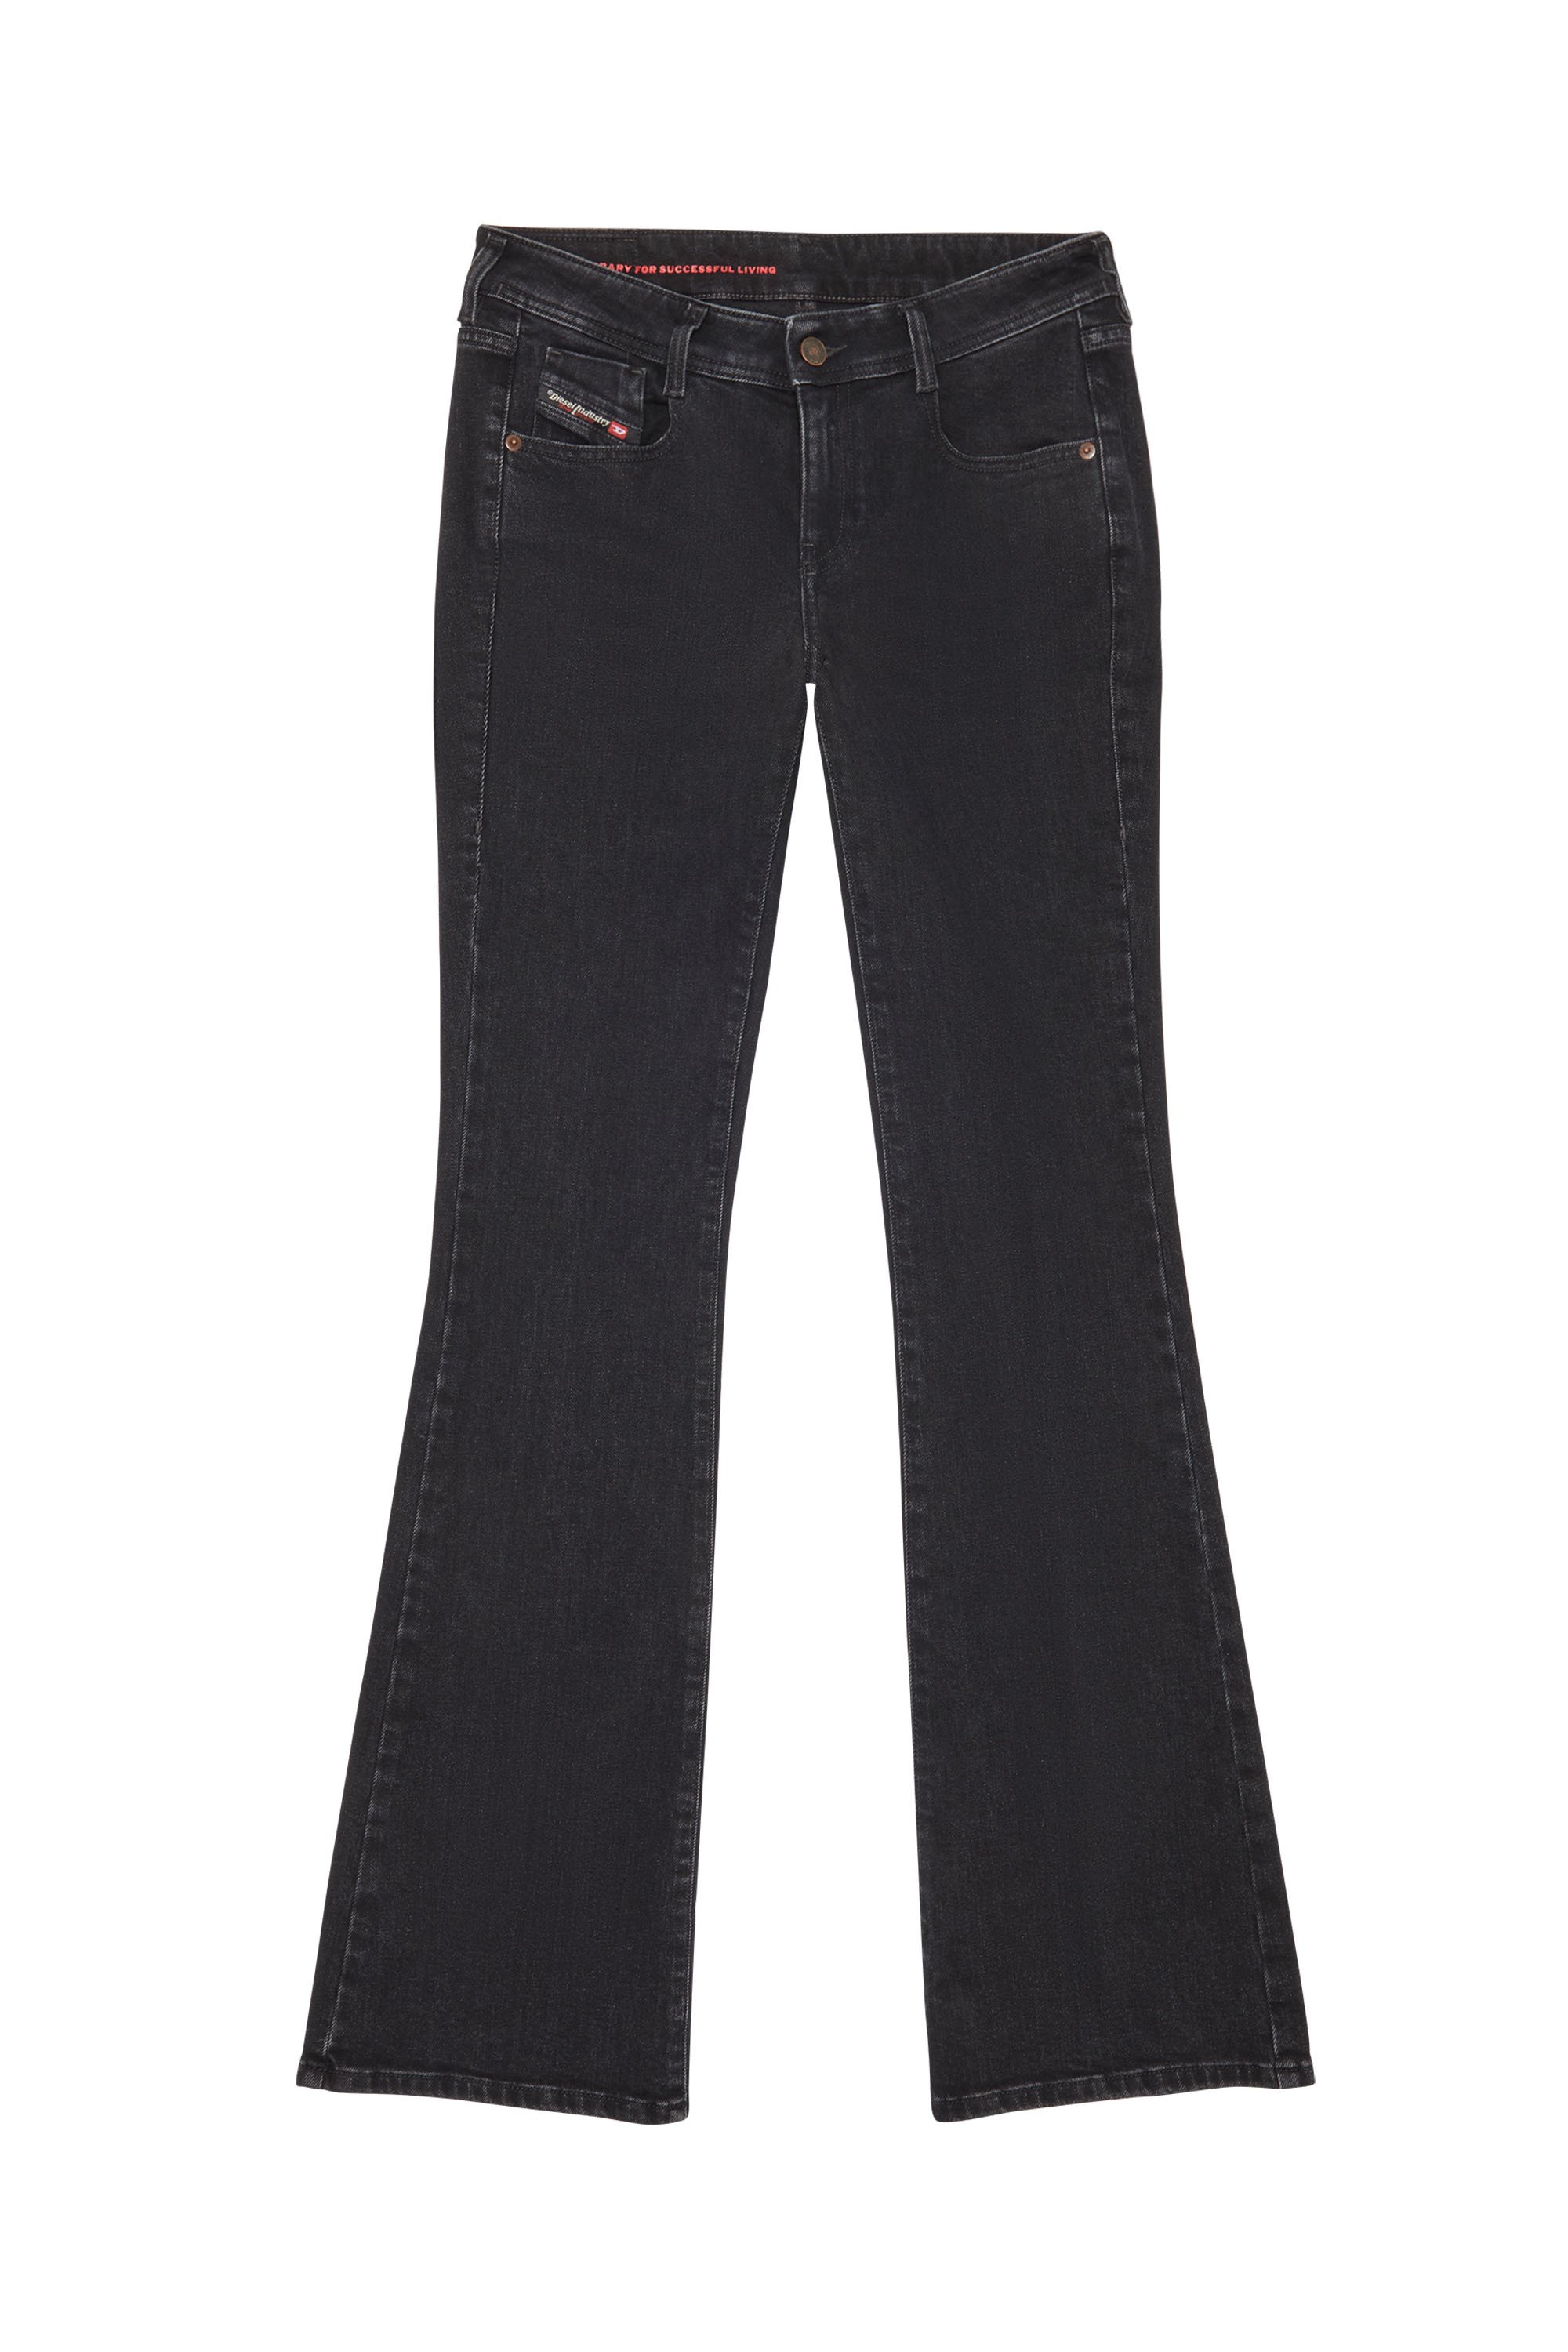 1969 D-Ebbey Z9C25 Bootcut and Flare Jeans, Black/Dark grey